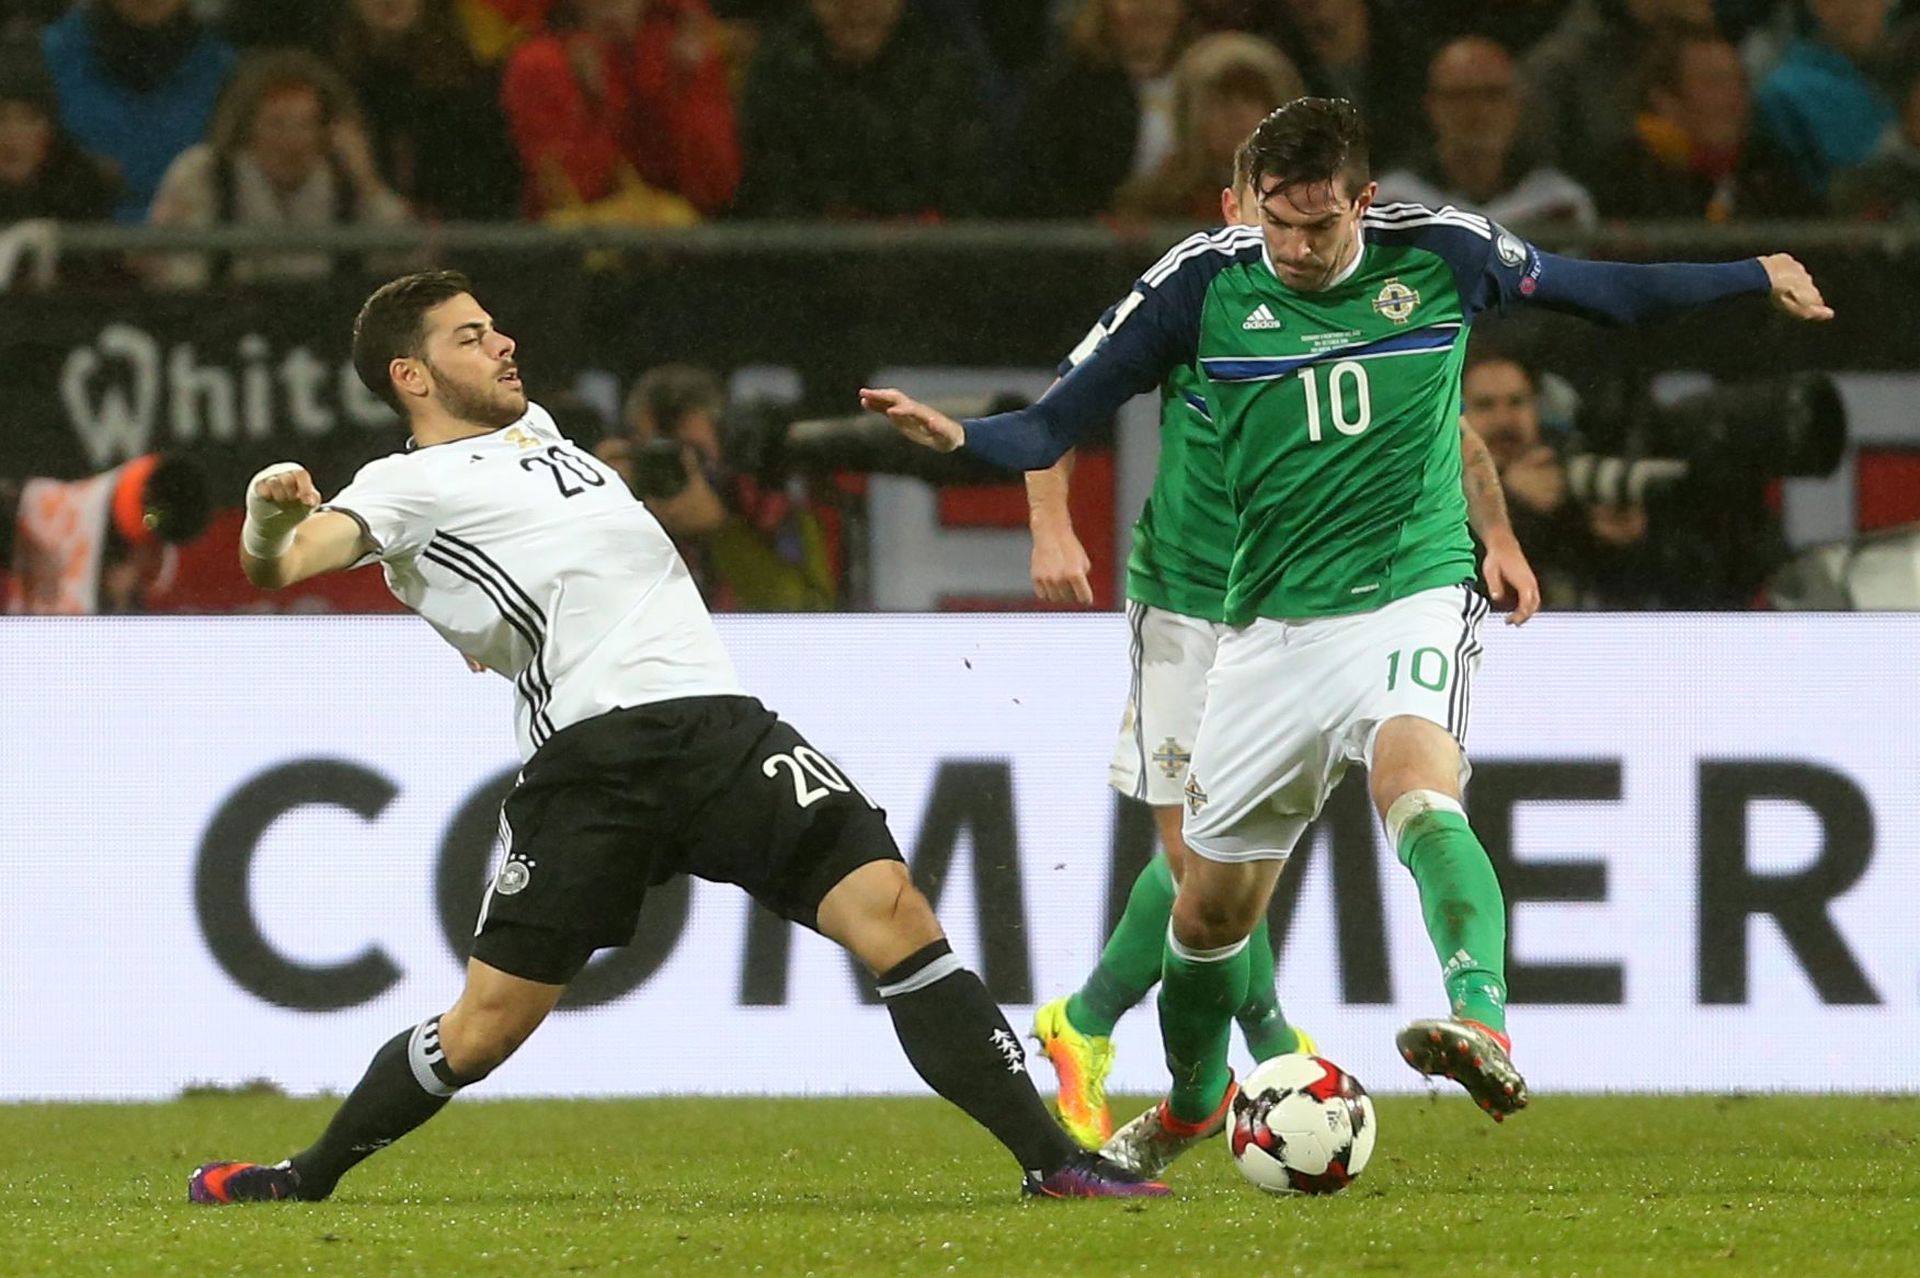 epa05581607 German Kevin Volland and Kyle Lafferty of Northerin Ireland in action during a FIFA World Cup qualifying match between Germany and Northern Ireland the HDI Arena in Hanover, Germany, 11 October 2016.  EPA/FRISO GENTSCH